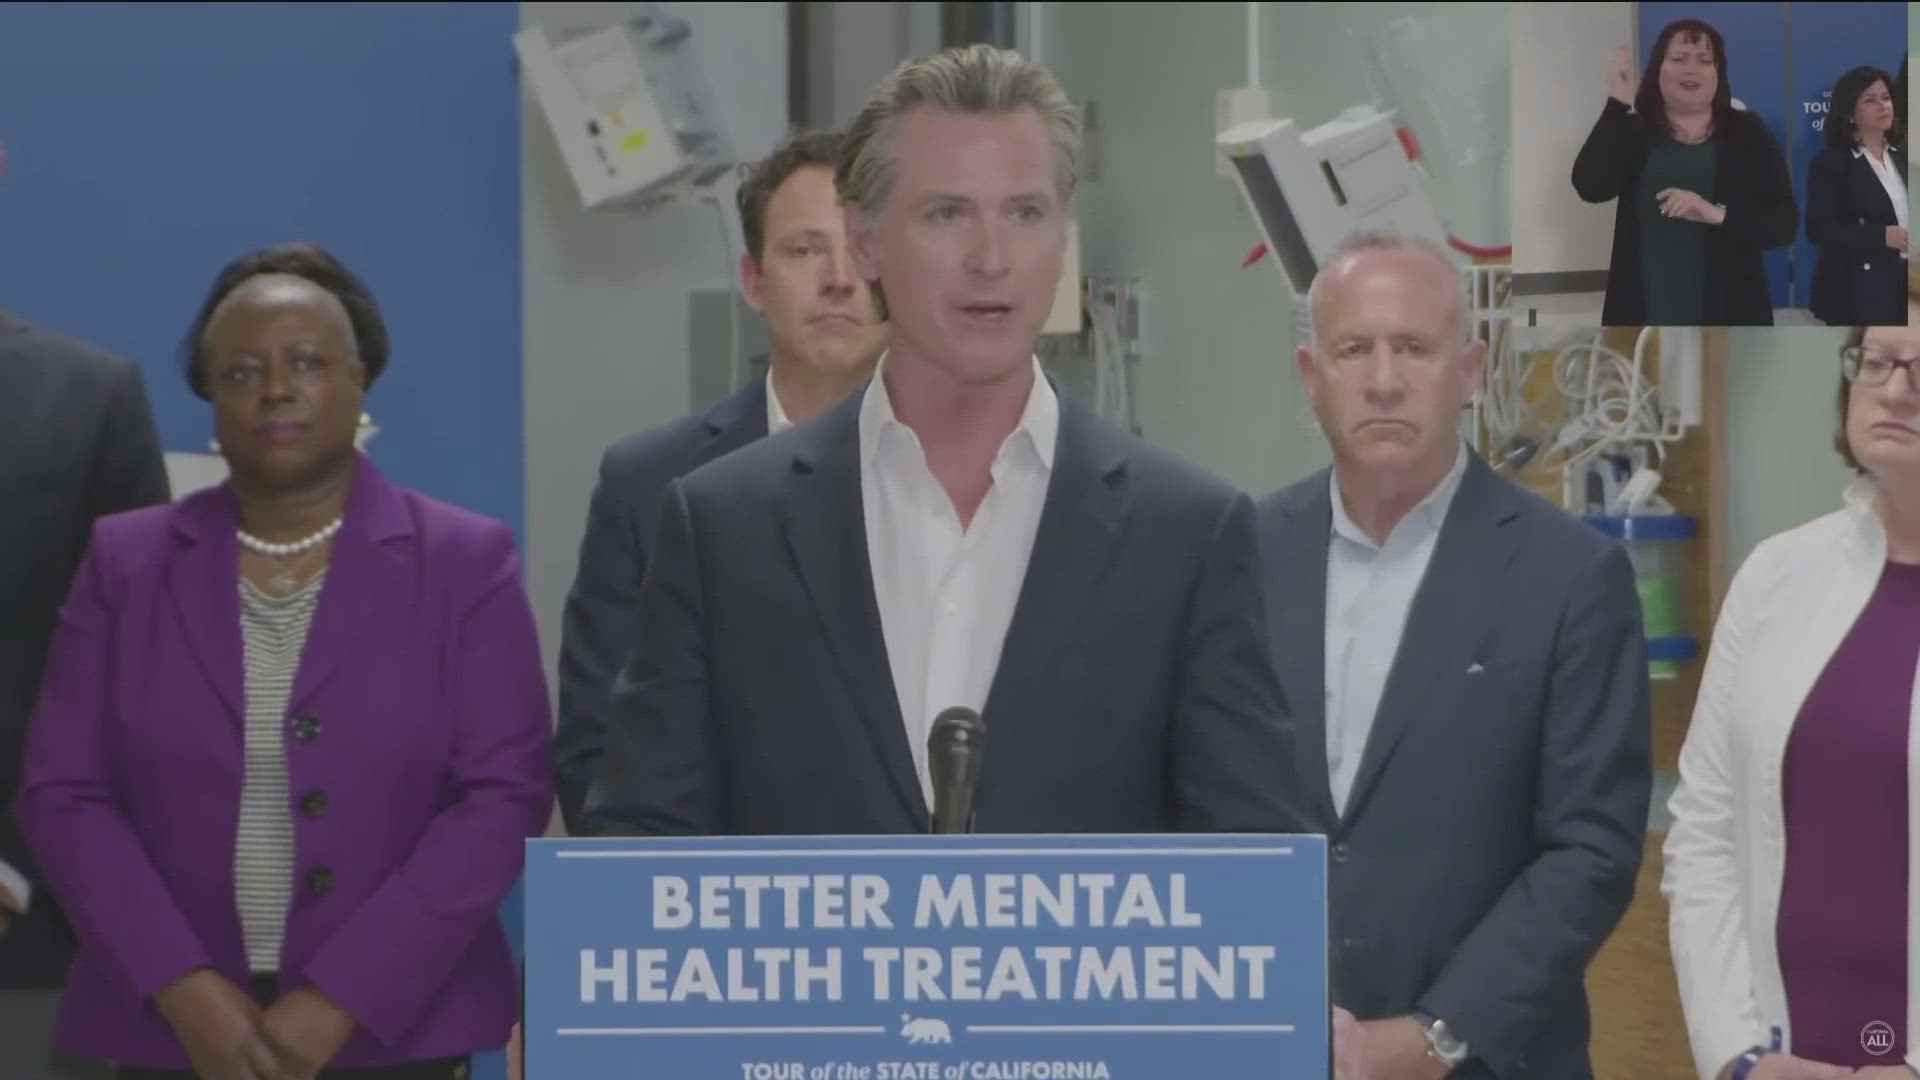 Gov. Newsom's four-day statewide tour focuses on priorities interrupted by crisis and the COVID pandemic, including homelessness, criminal justice and health care.